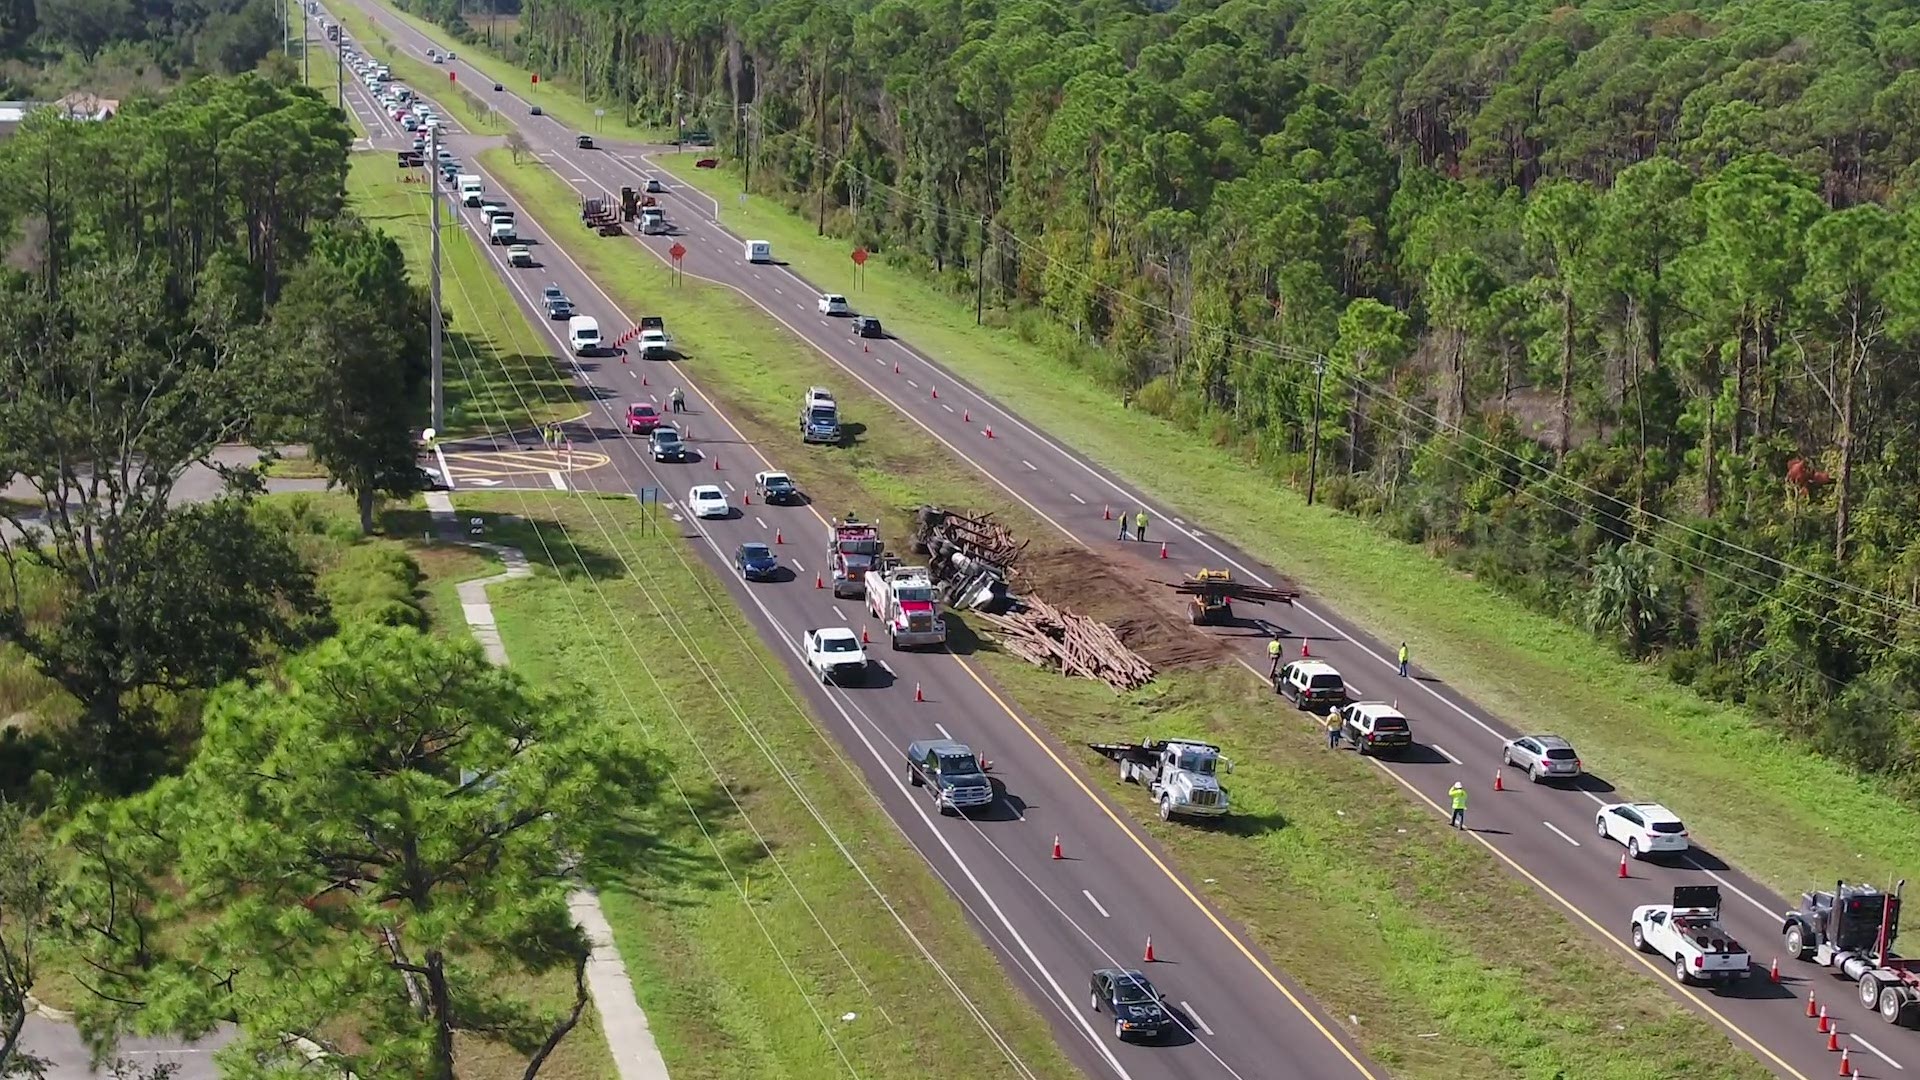 A 66-year-old man has died after a log truck and vehicle collided in Nassau County Tuesday morning, according to the Florida Highway Patrol.